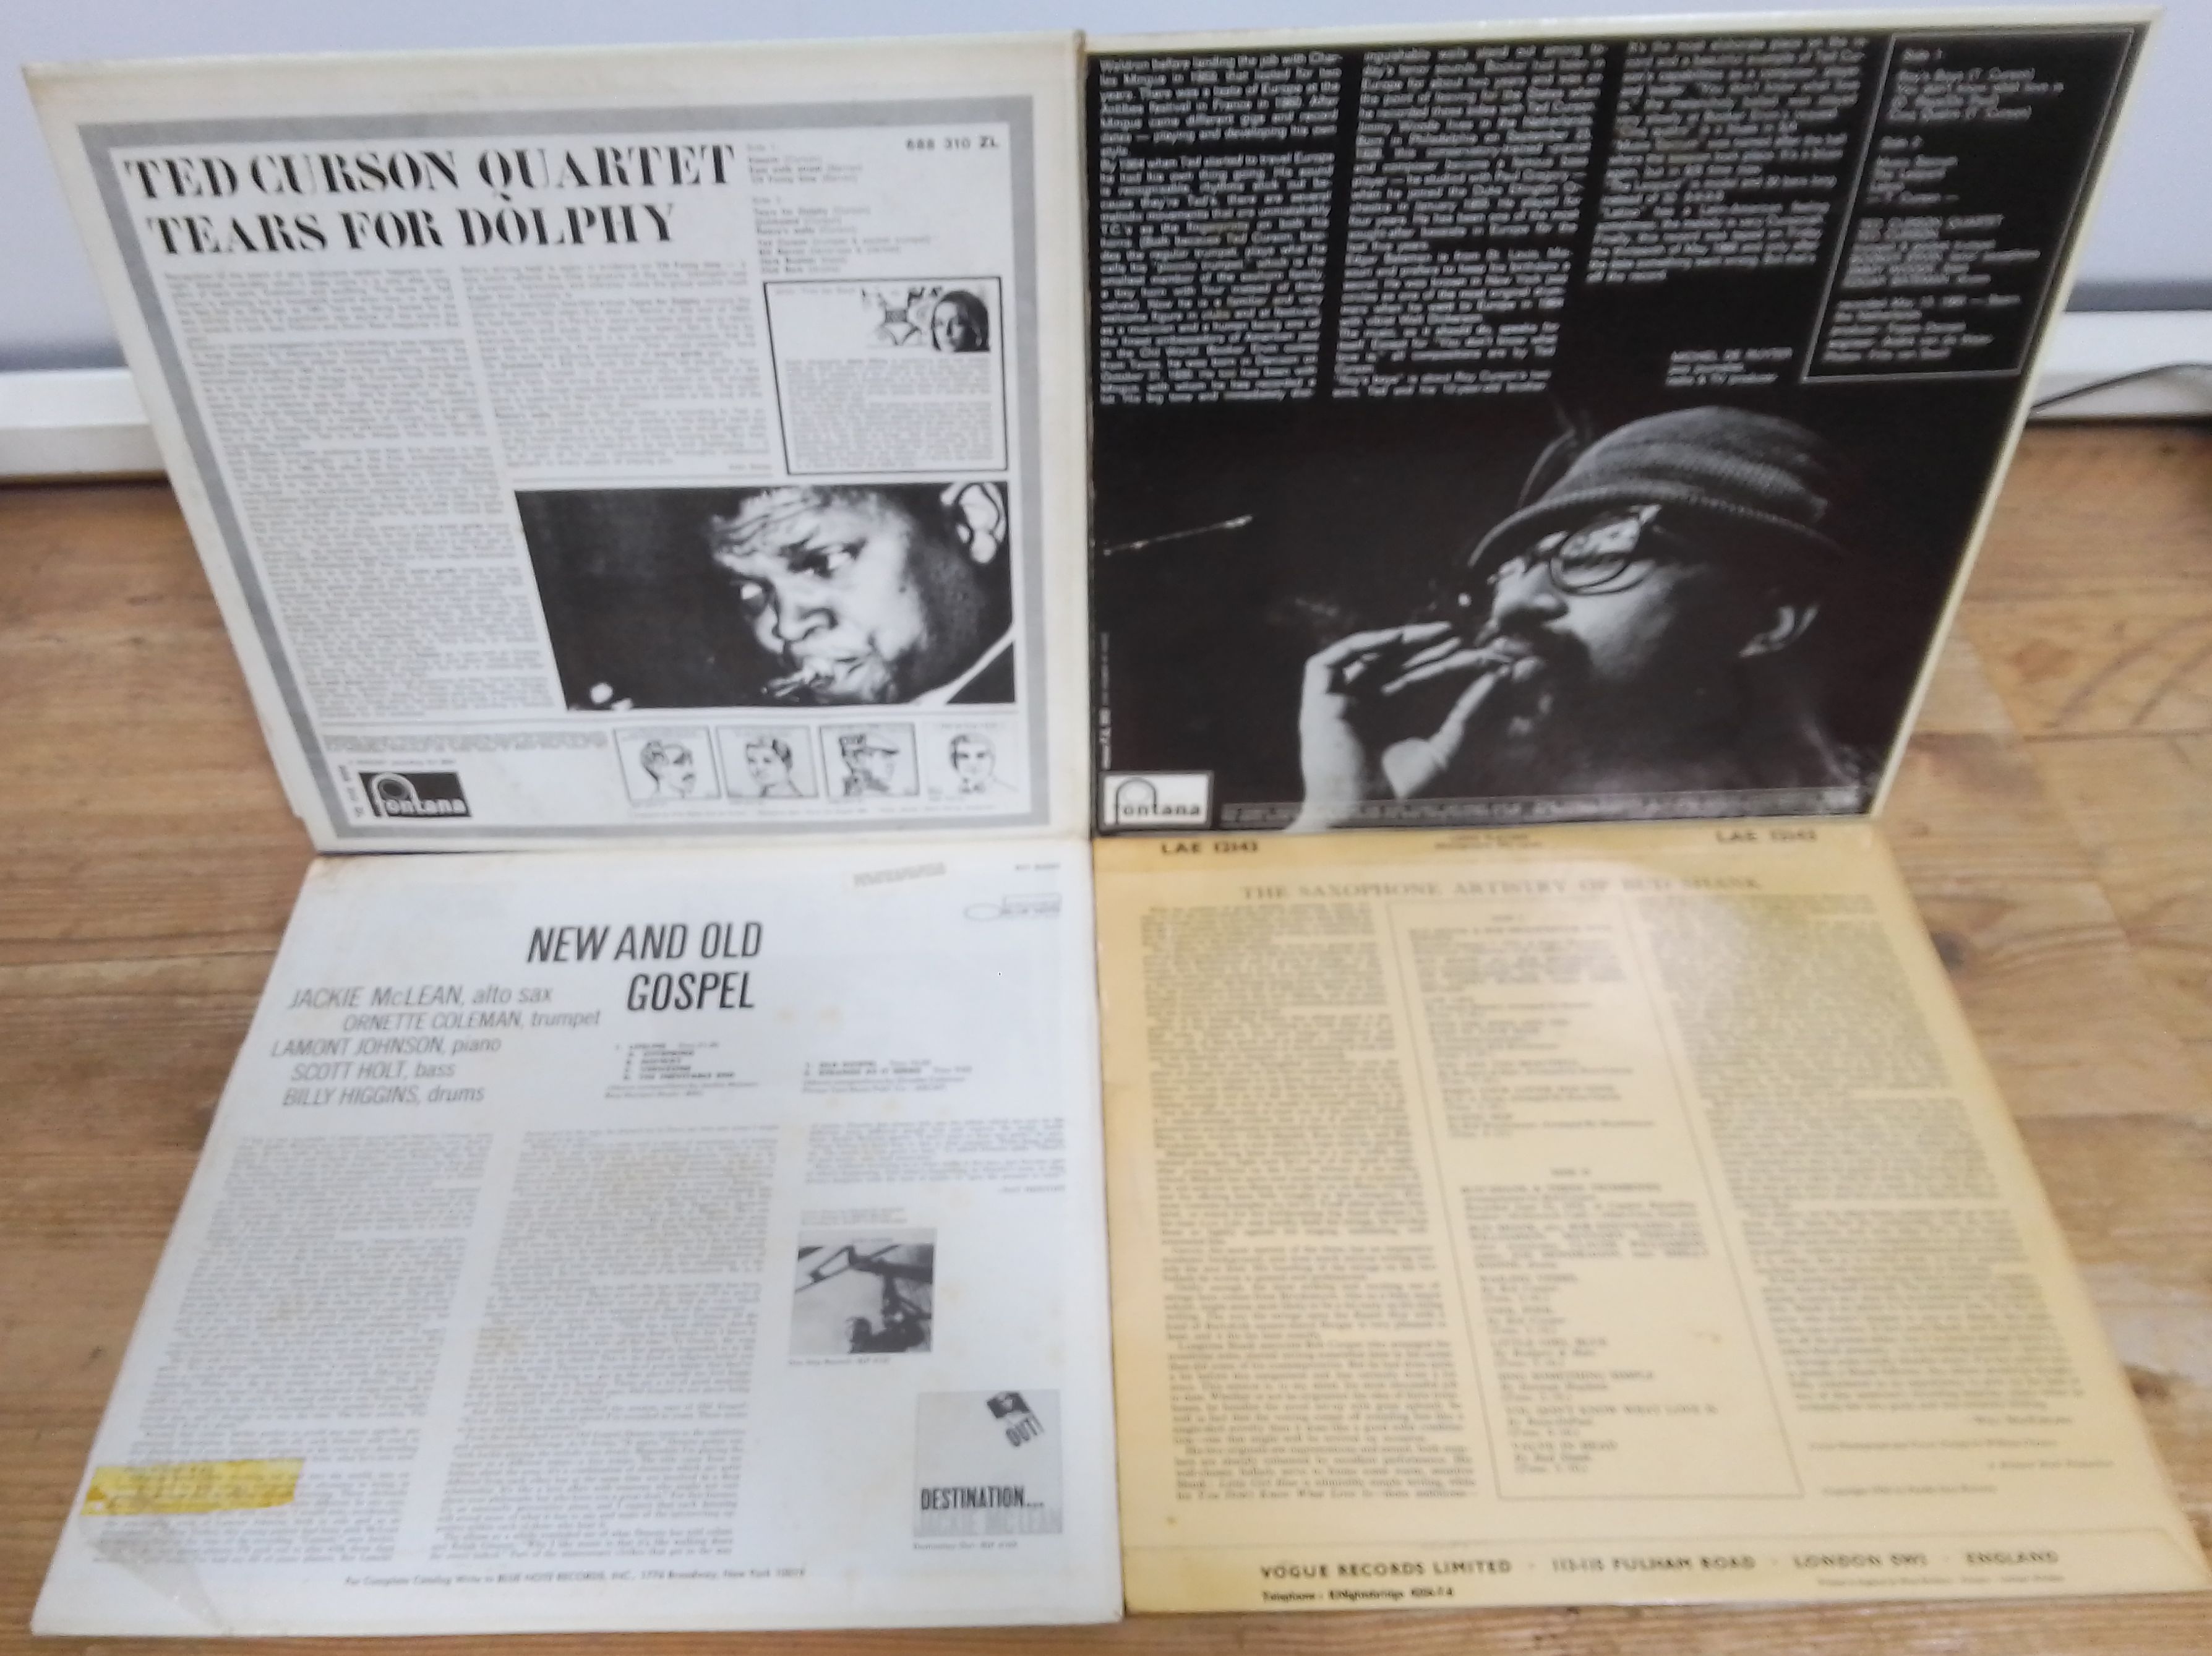 Four jazz LPs comprising Ted Curson Quartet - Tears for Dolphy, Fontana 688310 and Urge, Fontana - Image 2 of 10